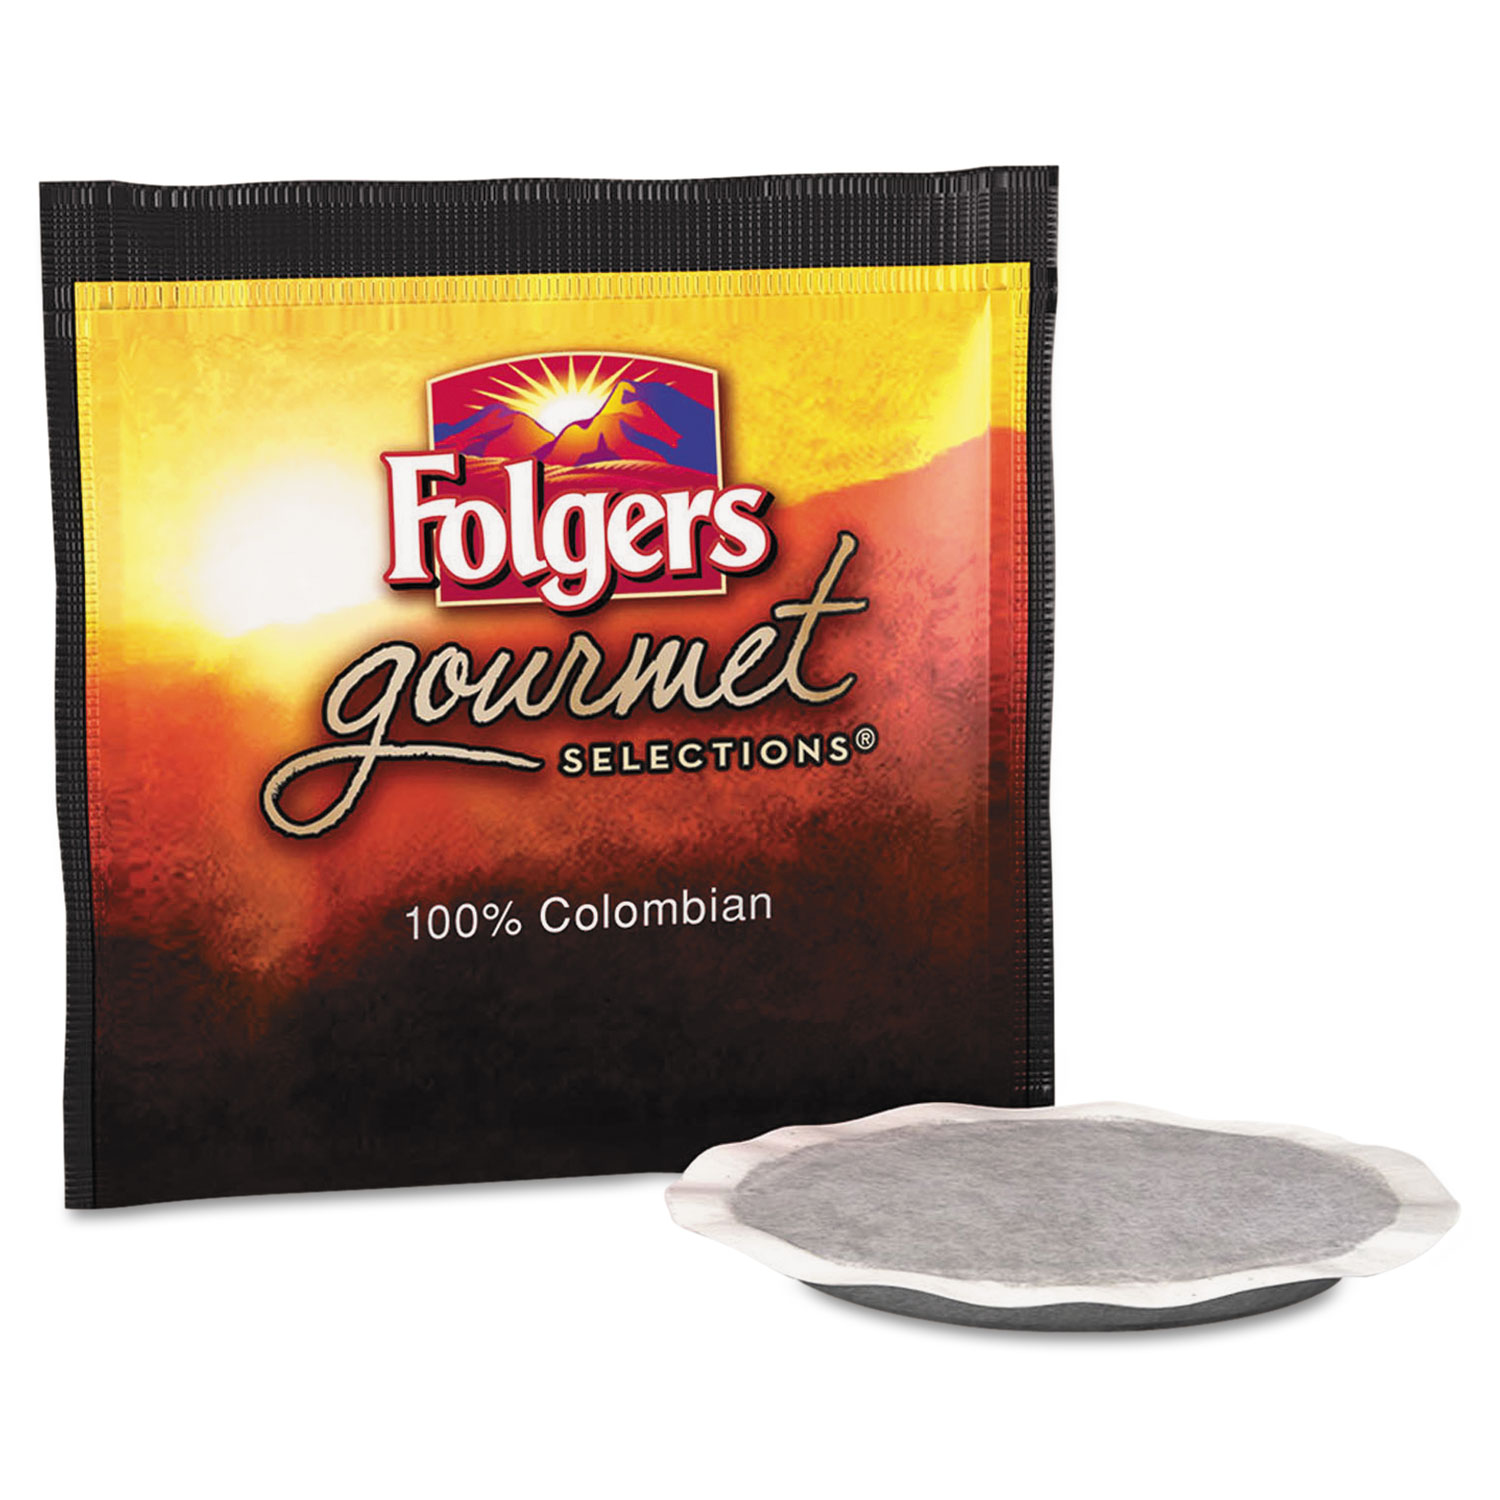  Folgers 2550063100 Gourmet Selections Coffee Pods, 100% Colombian, 18/Box (FOL63100) 